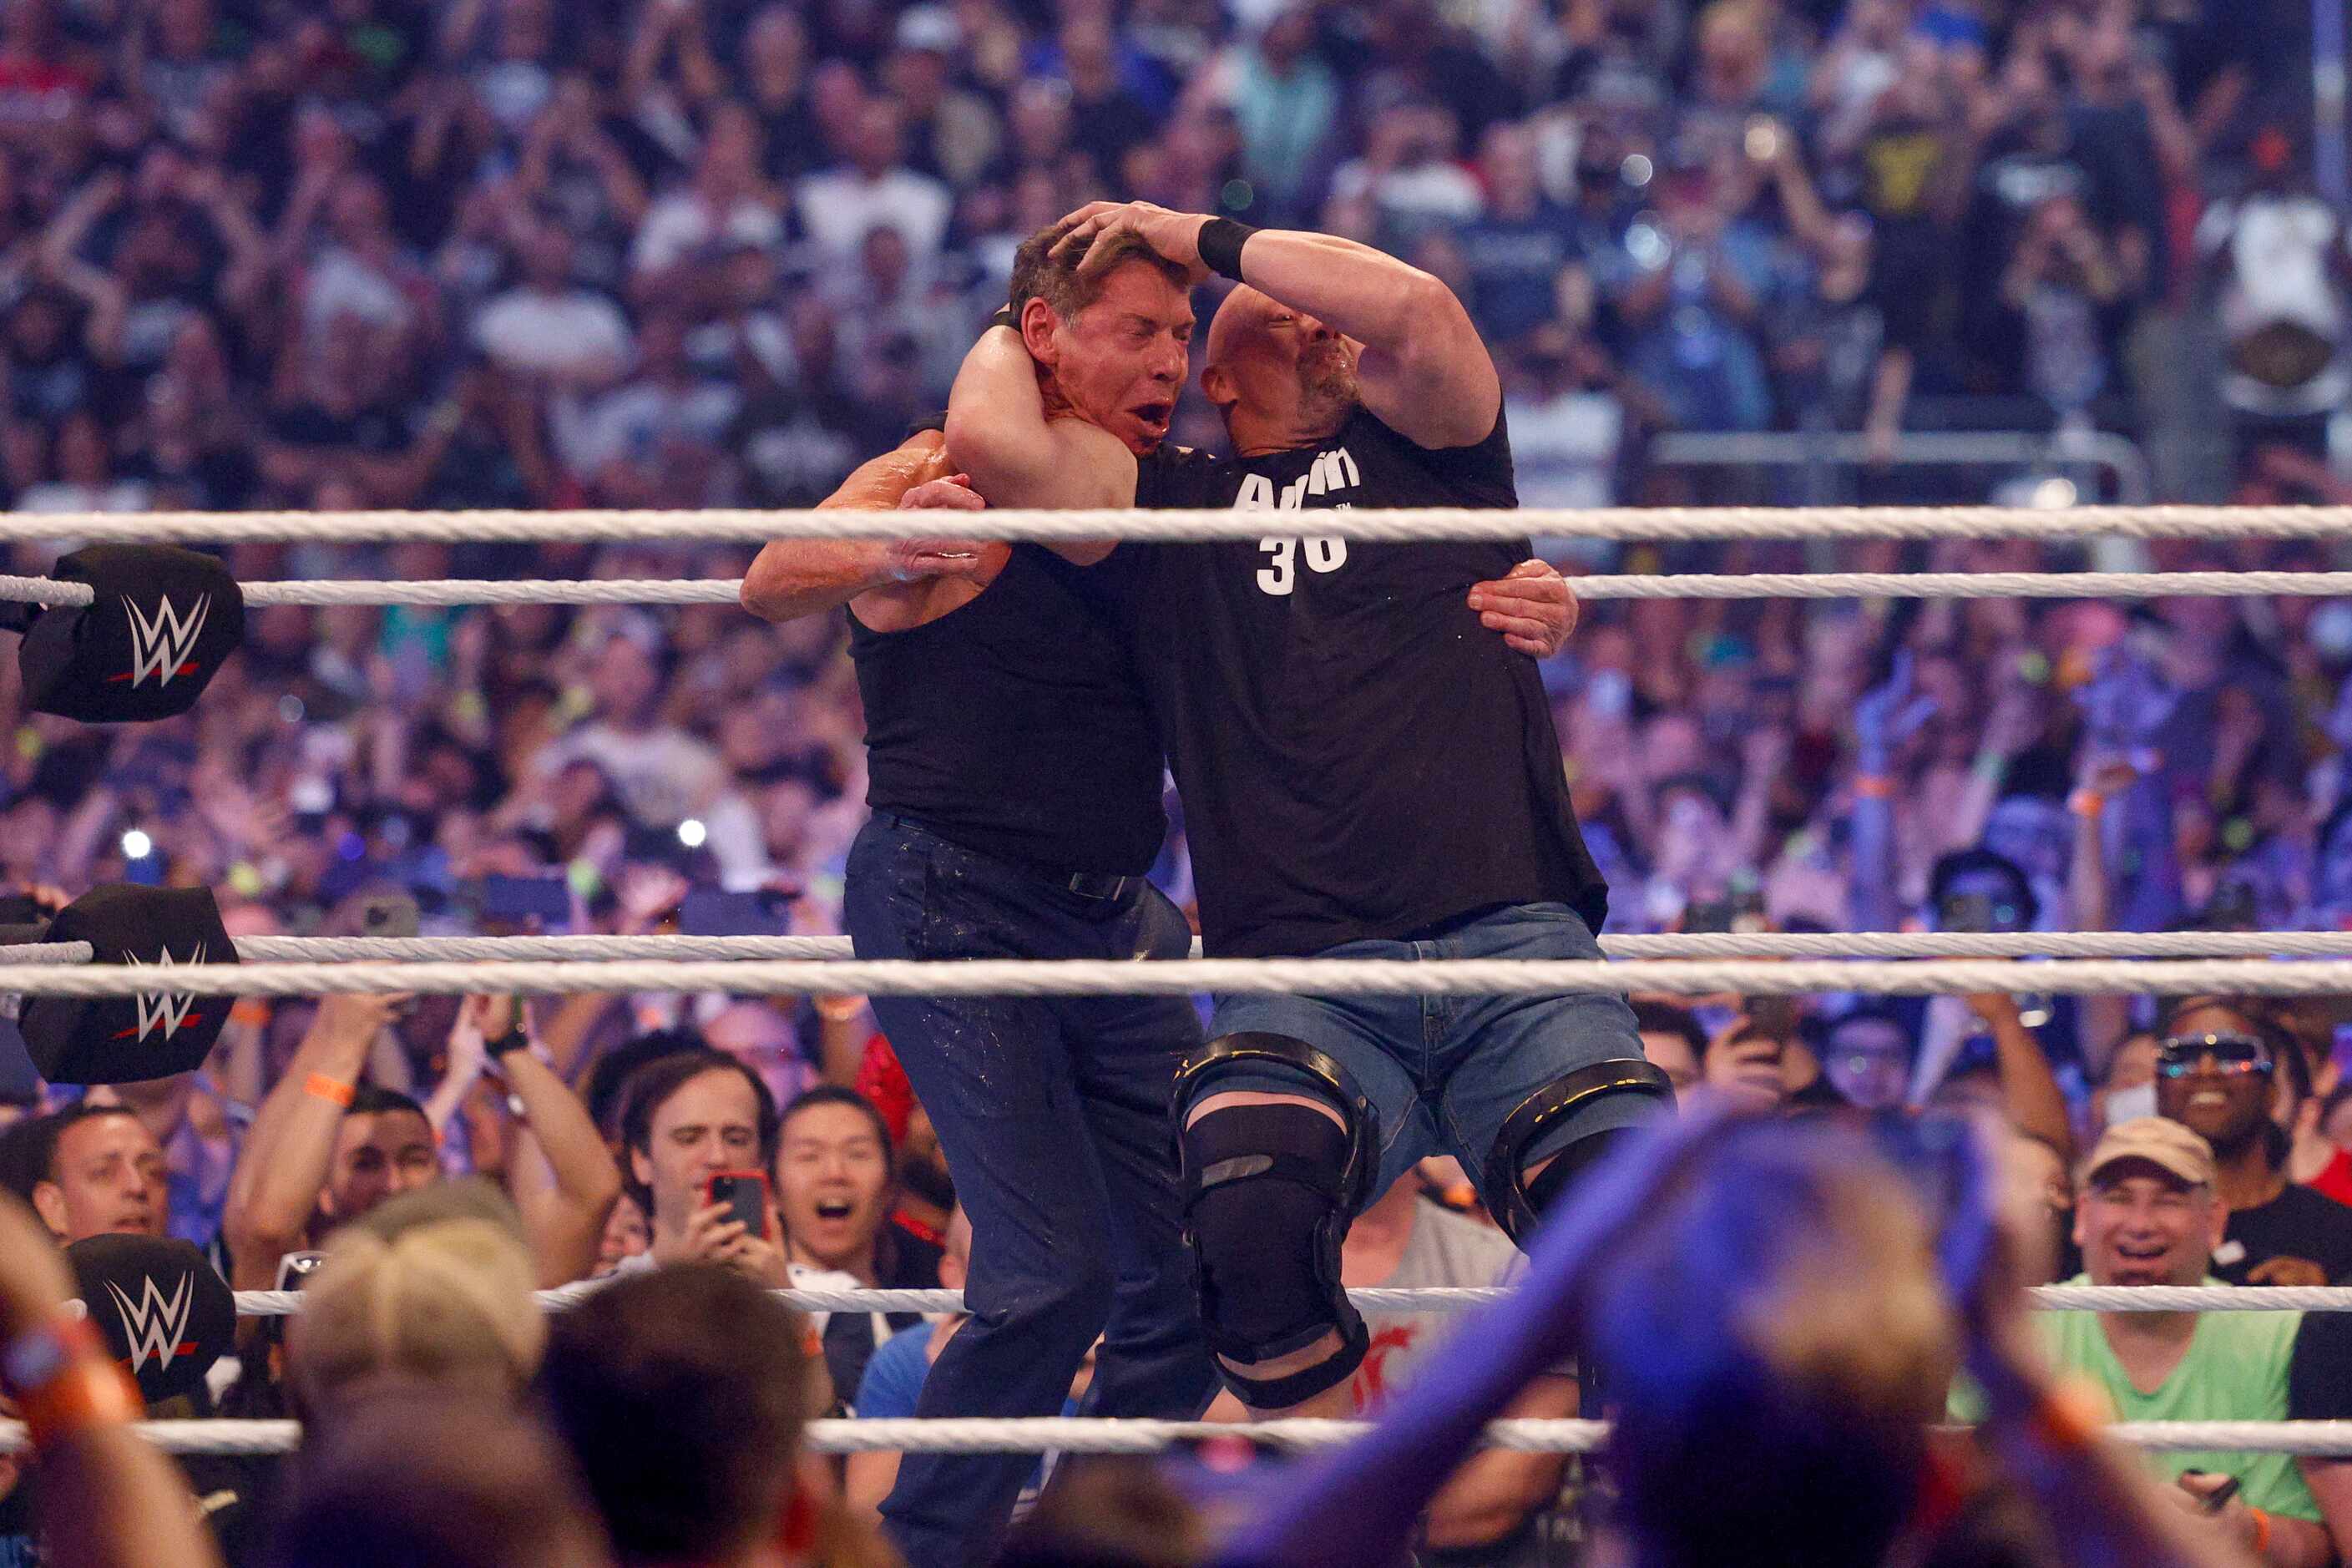 “Stone Cold” Steve Austin hits Vince McMahon with a Stunner during a match at WrestleMania...